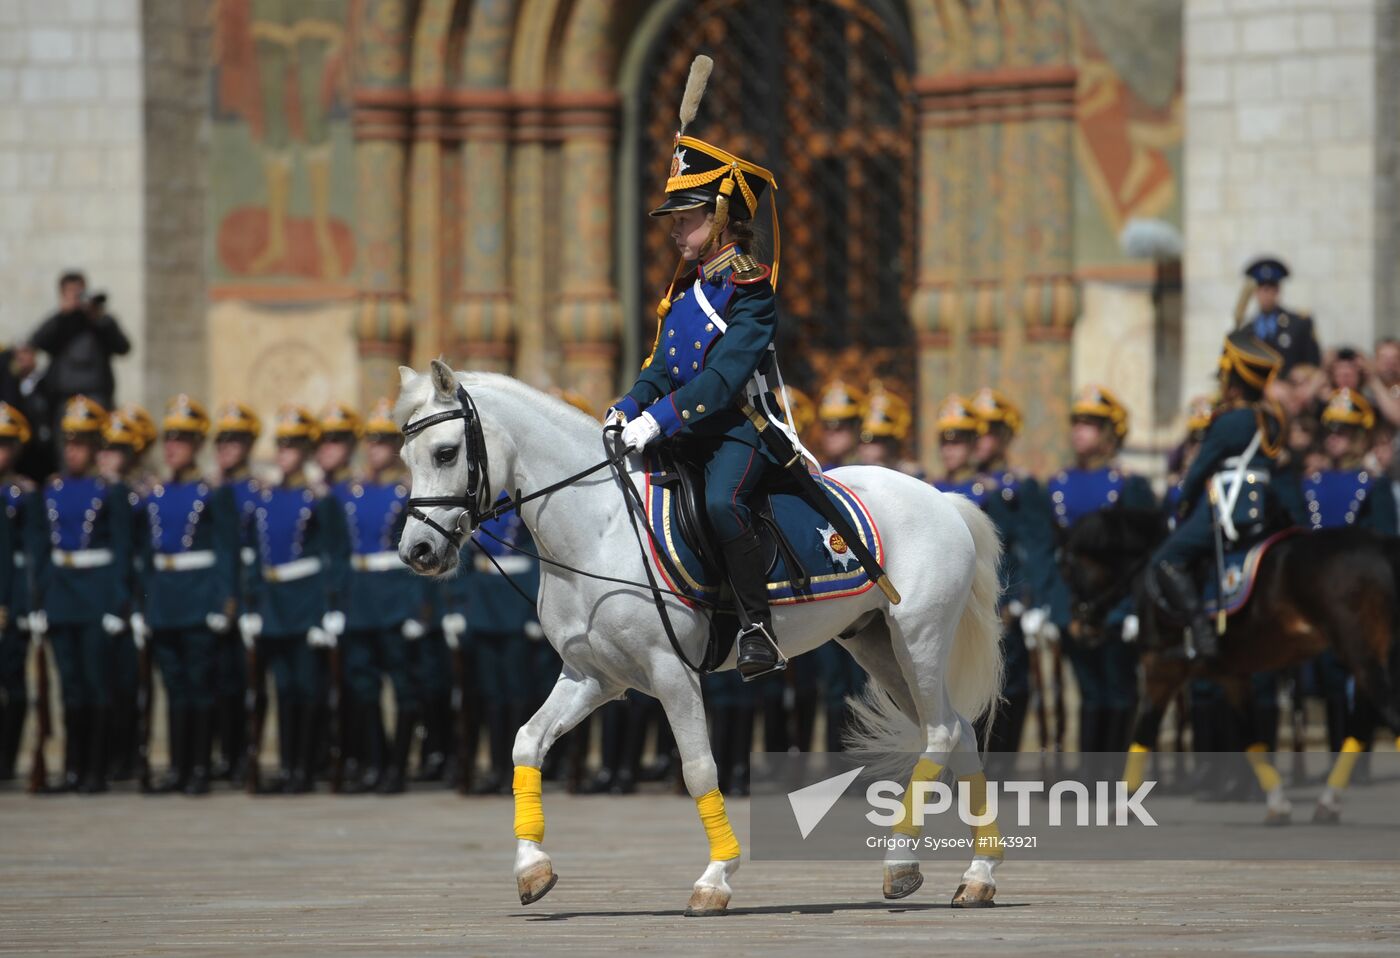 Separation ceremony of President regiment horse and foot guards